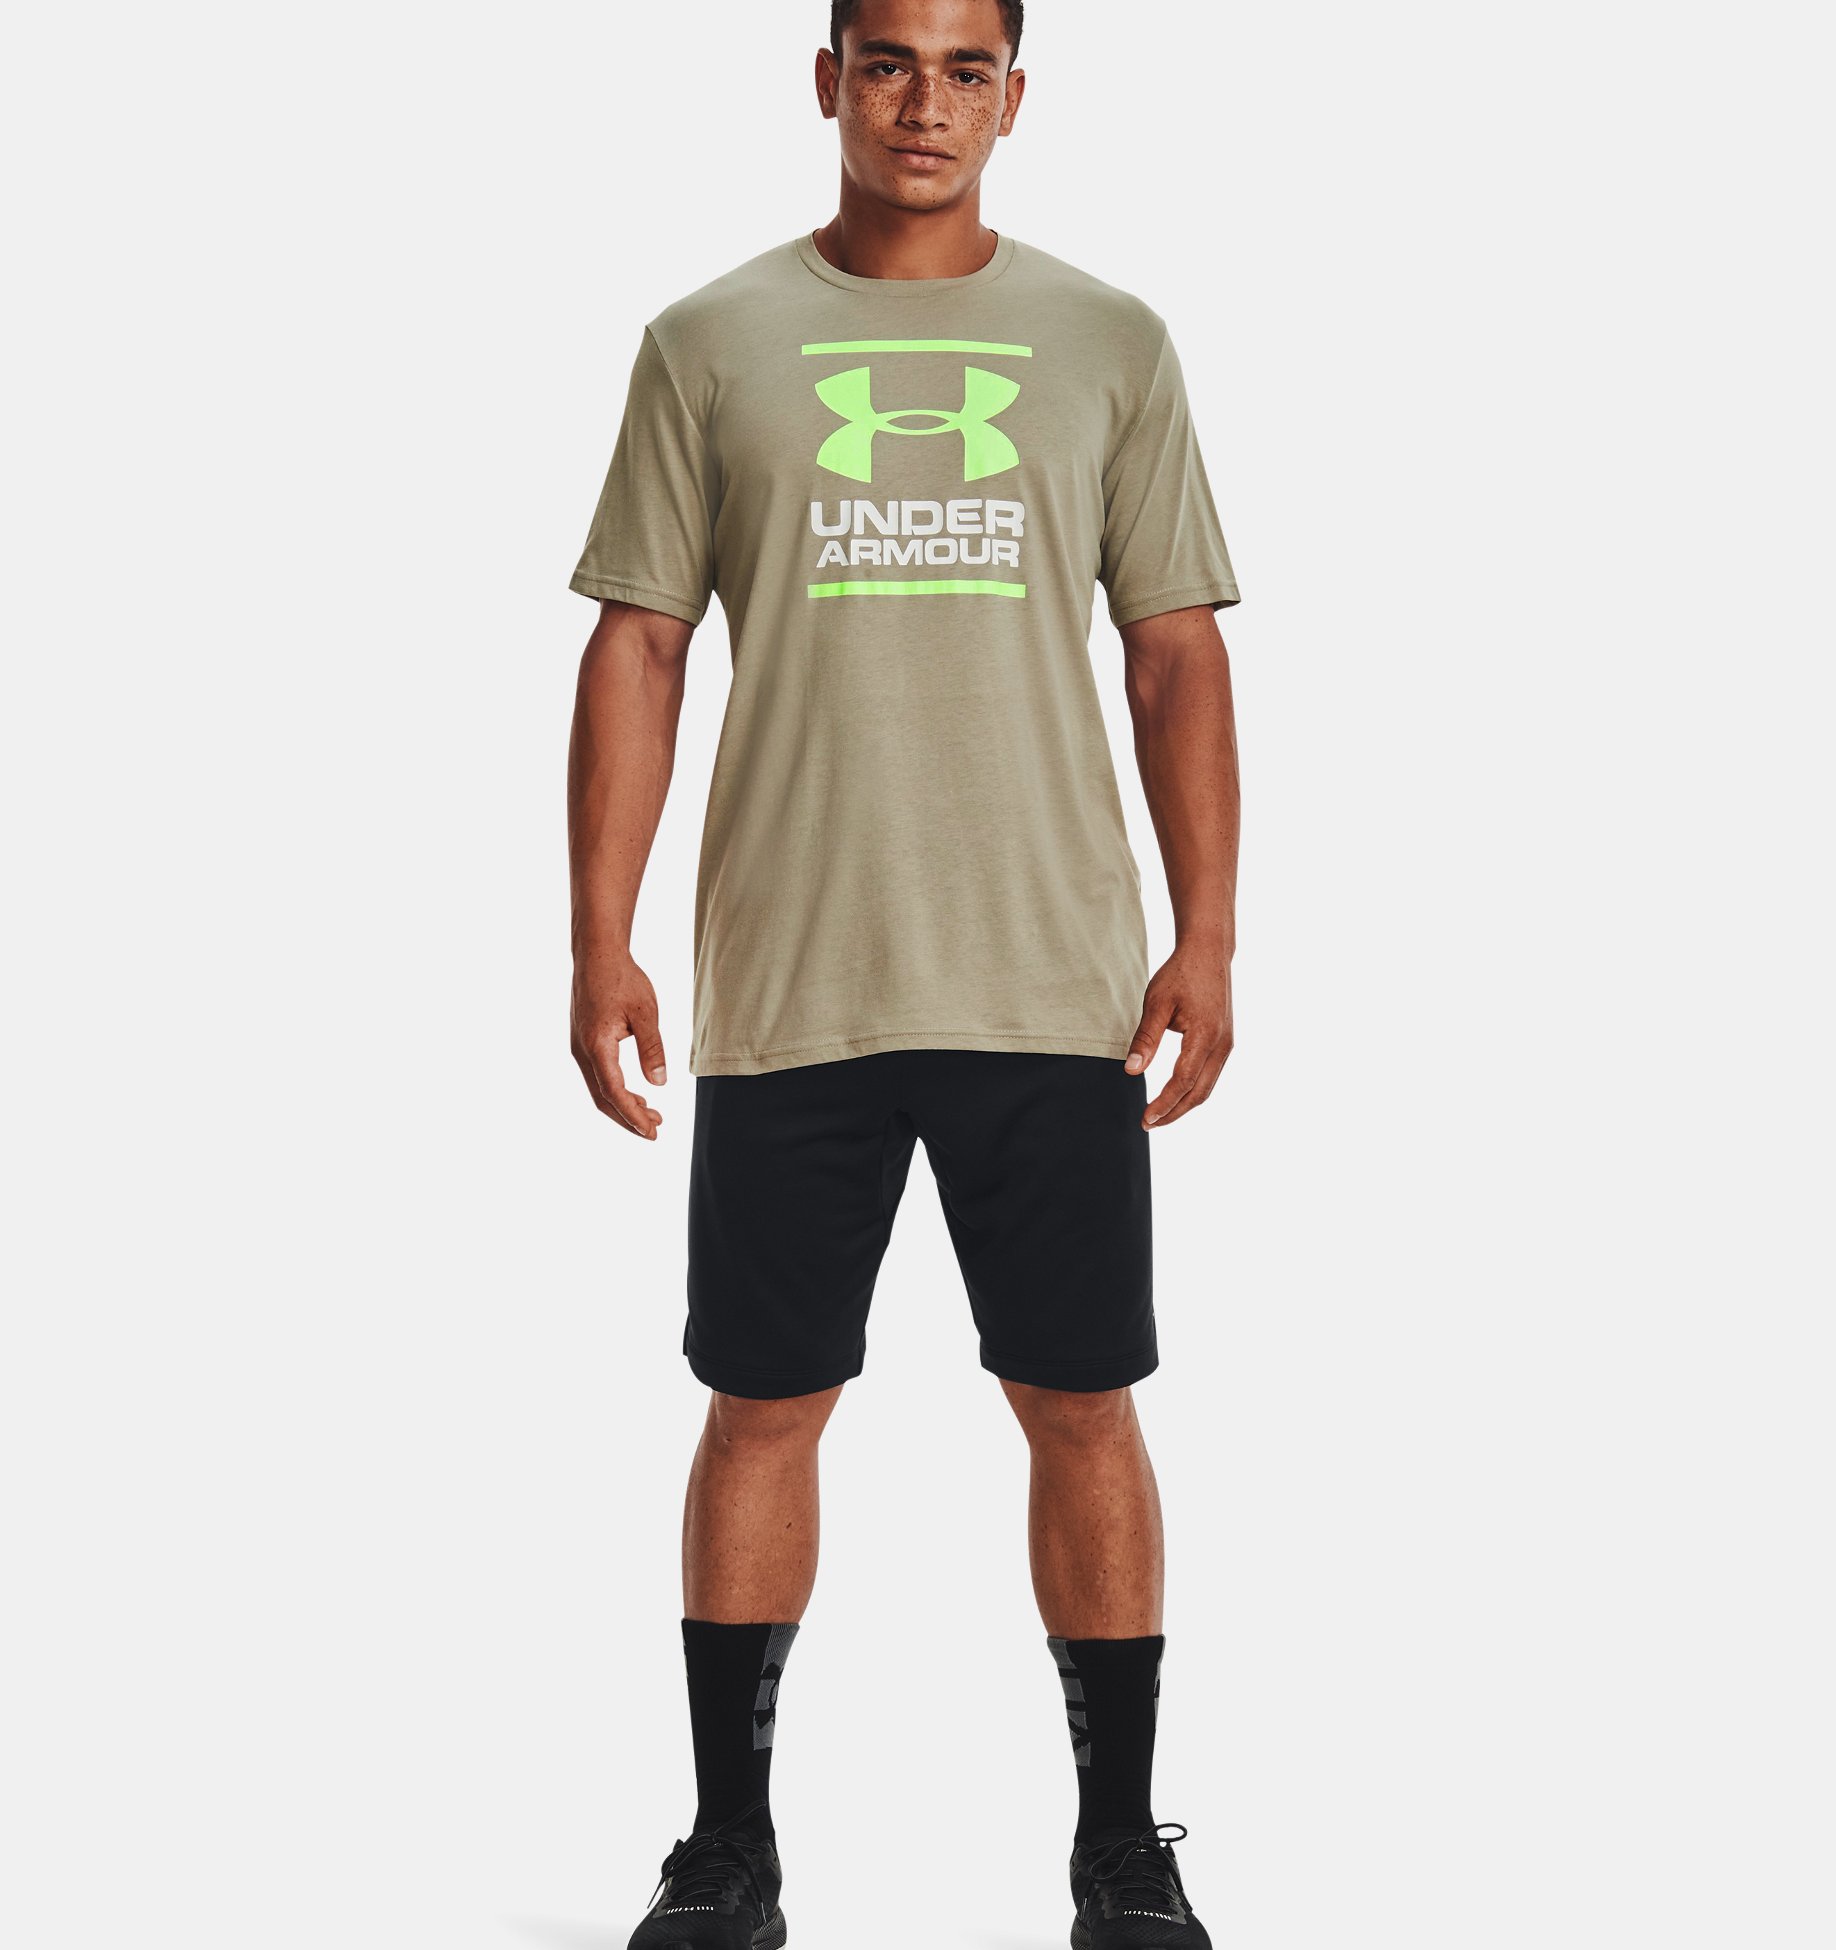 Super Soft Men's T Shirt for Training and Fitness Under Armour UA GL Foundation Short Sleeve Tee Fast-Drying Men's T Shirt with Graphic Men